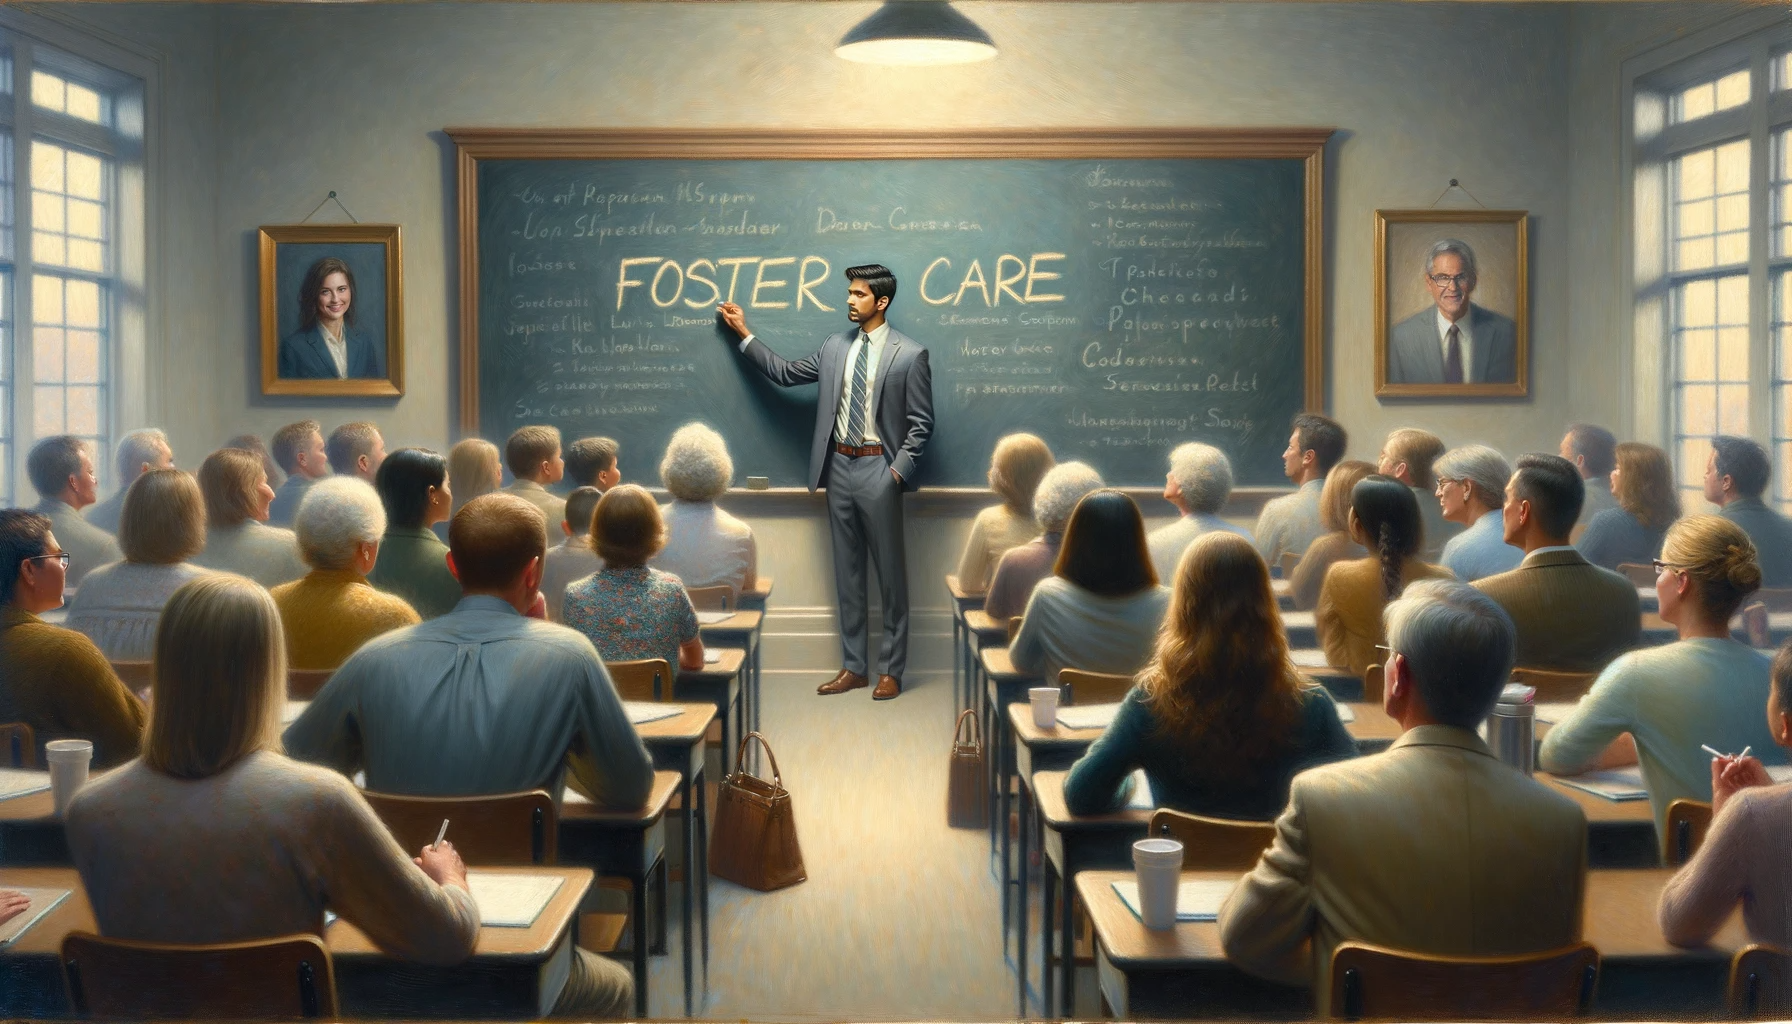 a man stands in front of a blackboard with the word foster care written on it